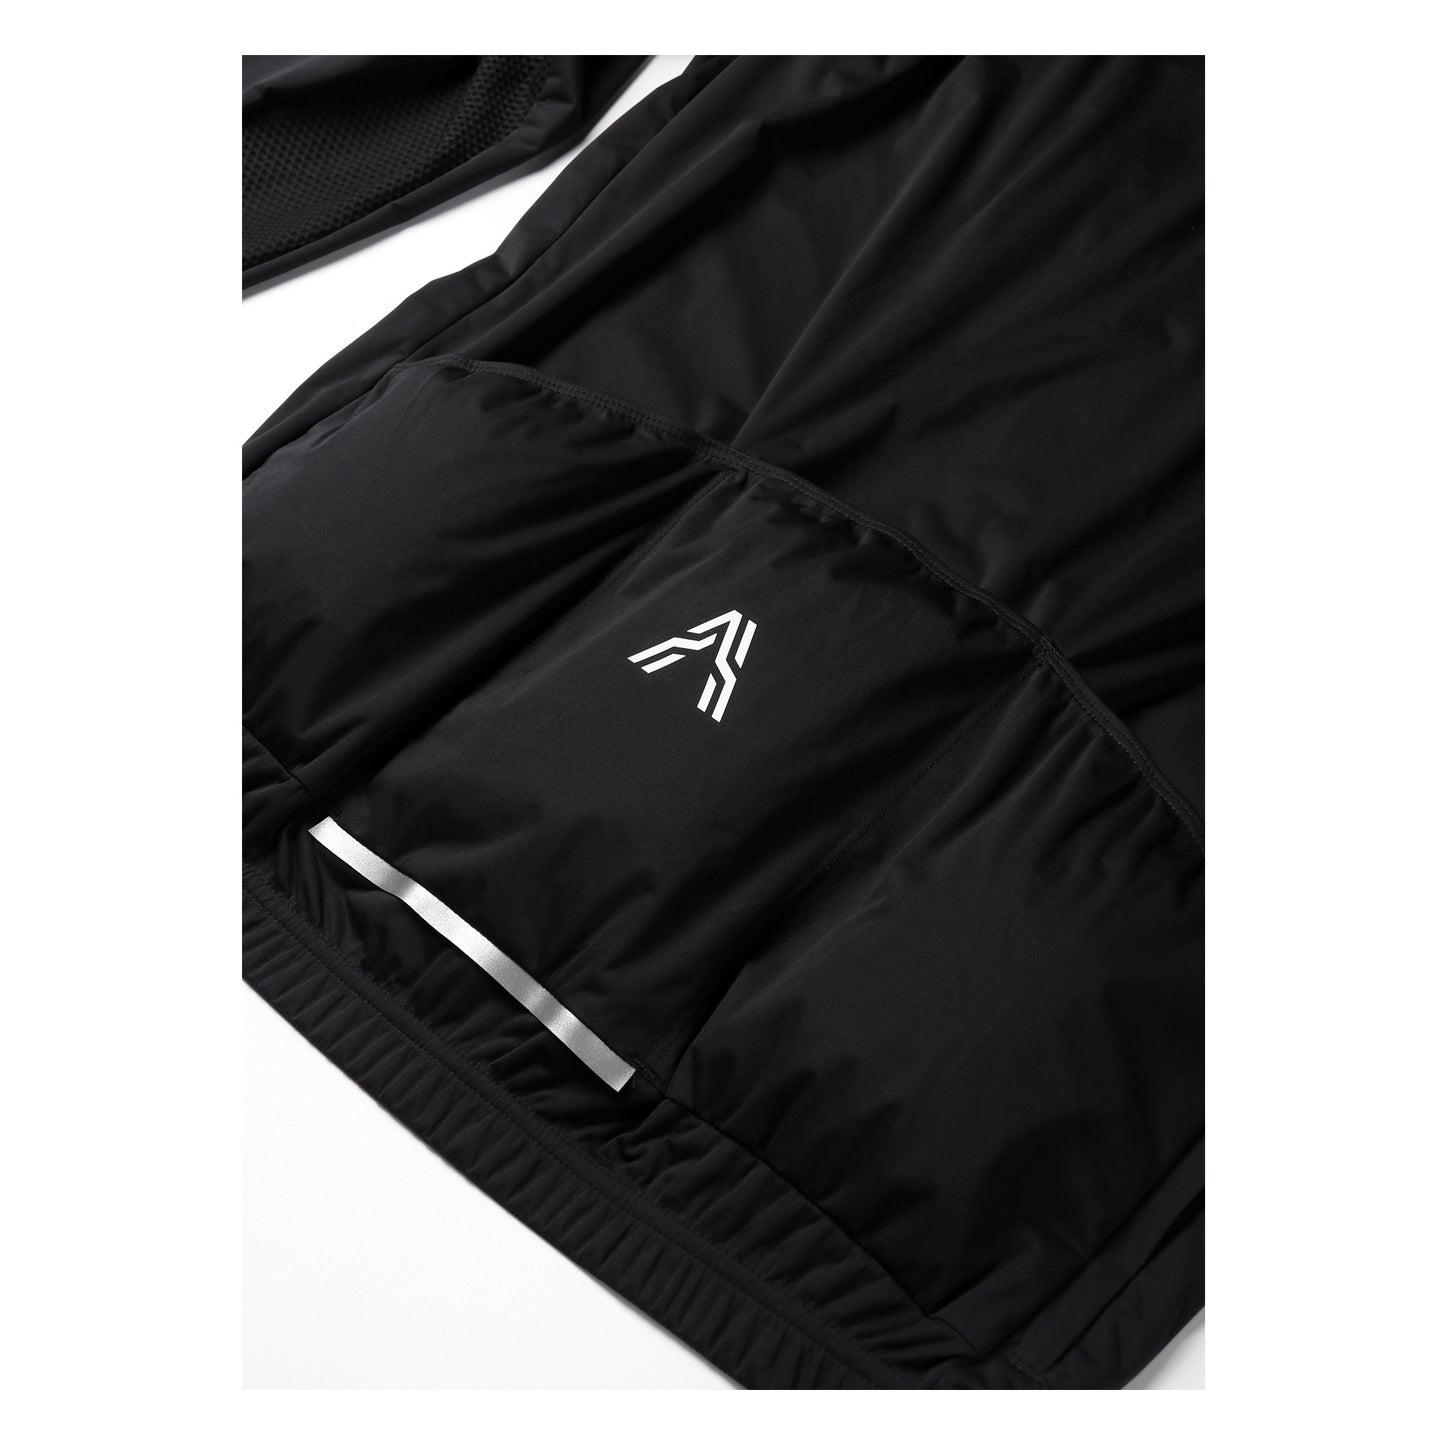 Aquarius Windproof and Waterproof Shield Jacket from Ascender Cycling Club in Zürich Switzerland Three Cargo Back Pockets View